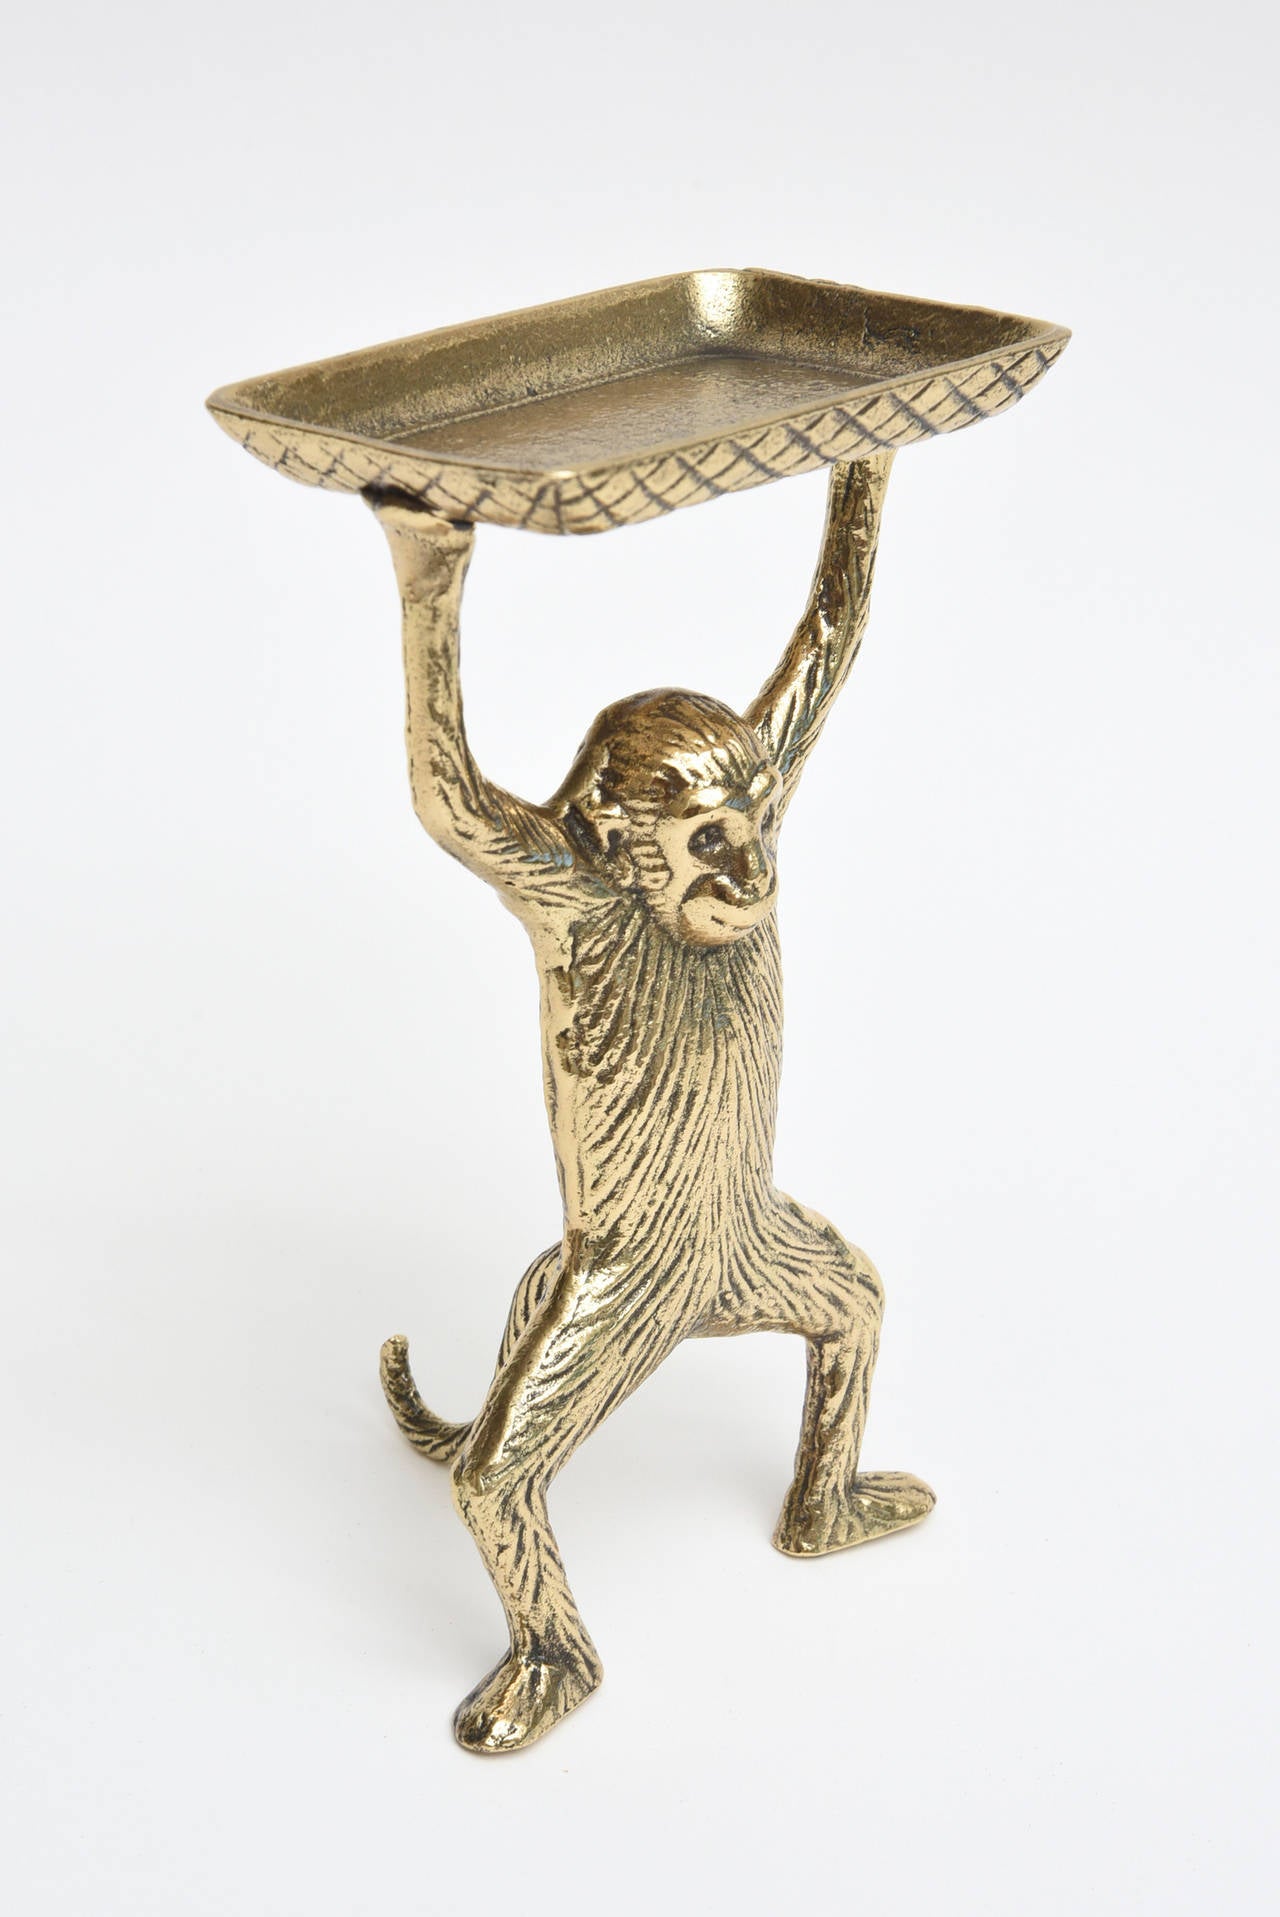 The delightful and strong monkey looks like he is holding up an entire brick.
It is solid brass with incised blackened lines and is vintage.
Great use for a card holder, paper clips, or soap for a bathroom.